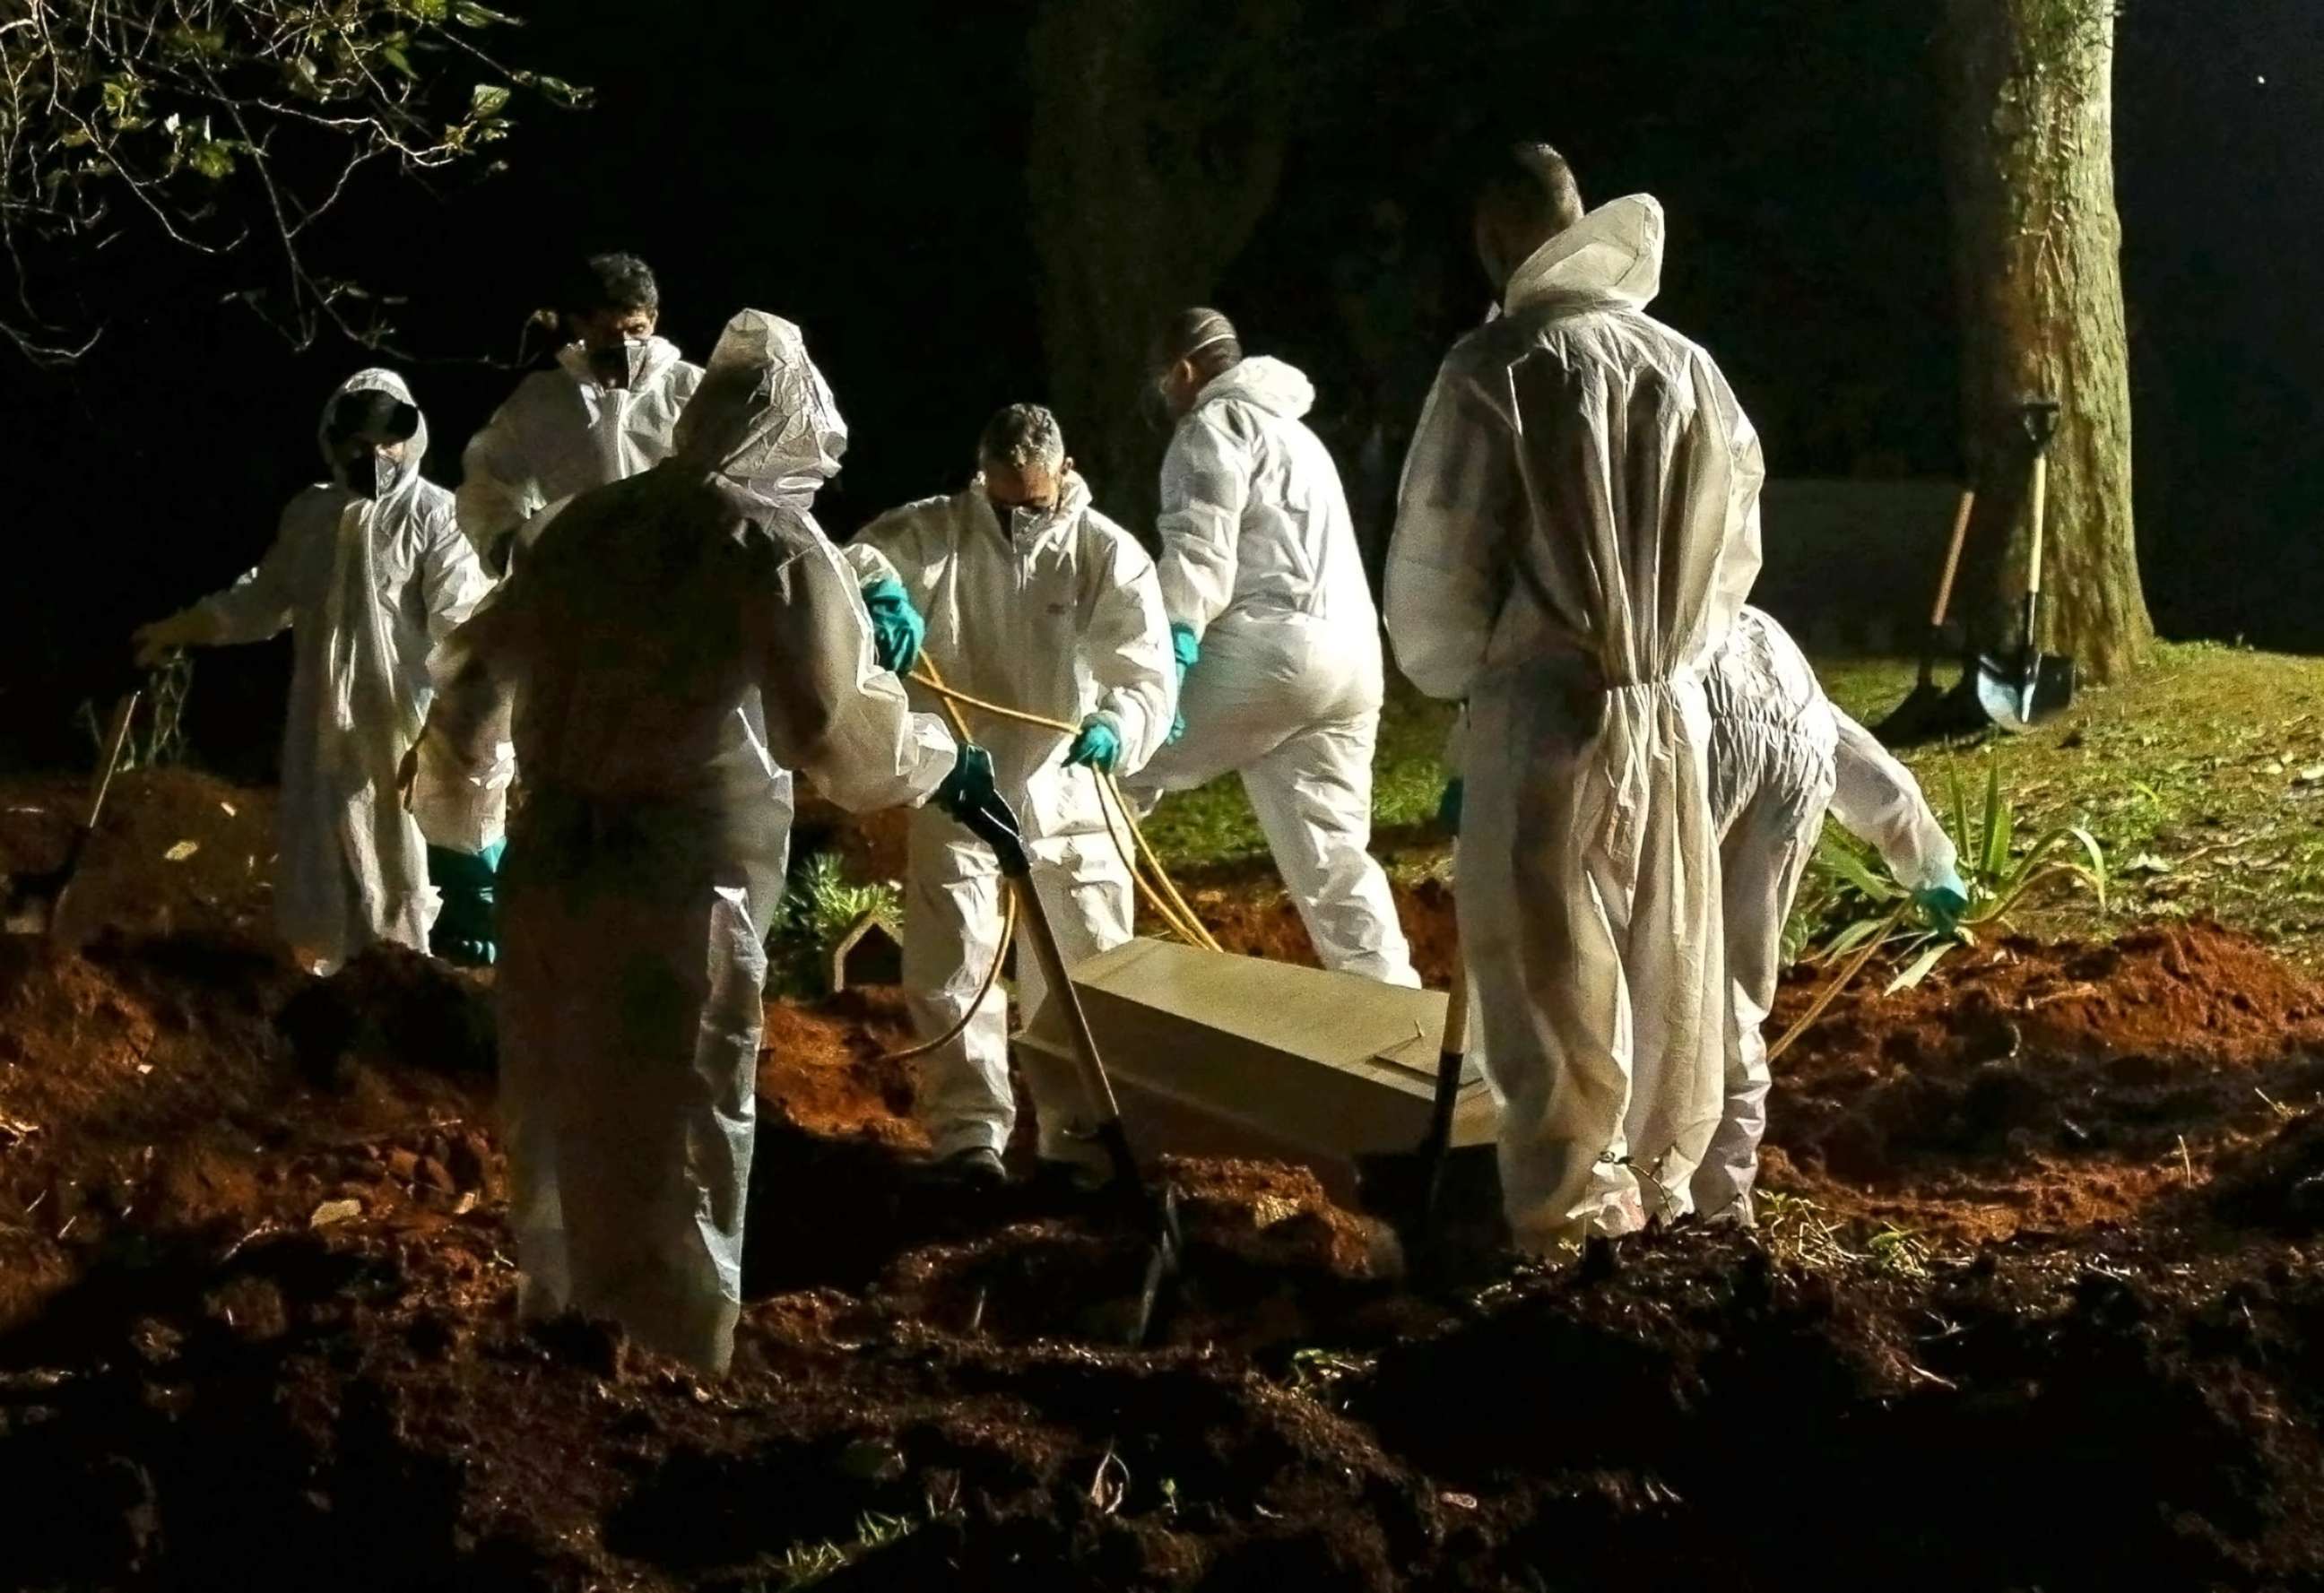 PHOTO: A coffin is buried at the Vila Formosa cemetery in Sao Paulo, Brazil, on March 31, 2021, amid the novel coronavirus COVID-19 pandemic.